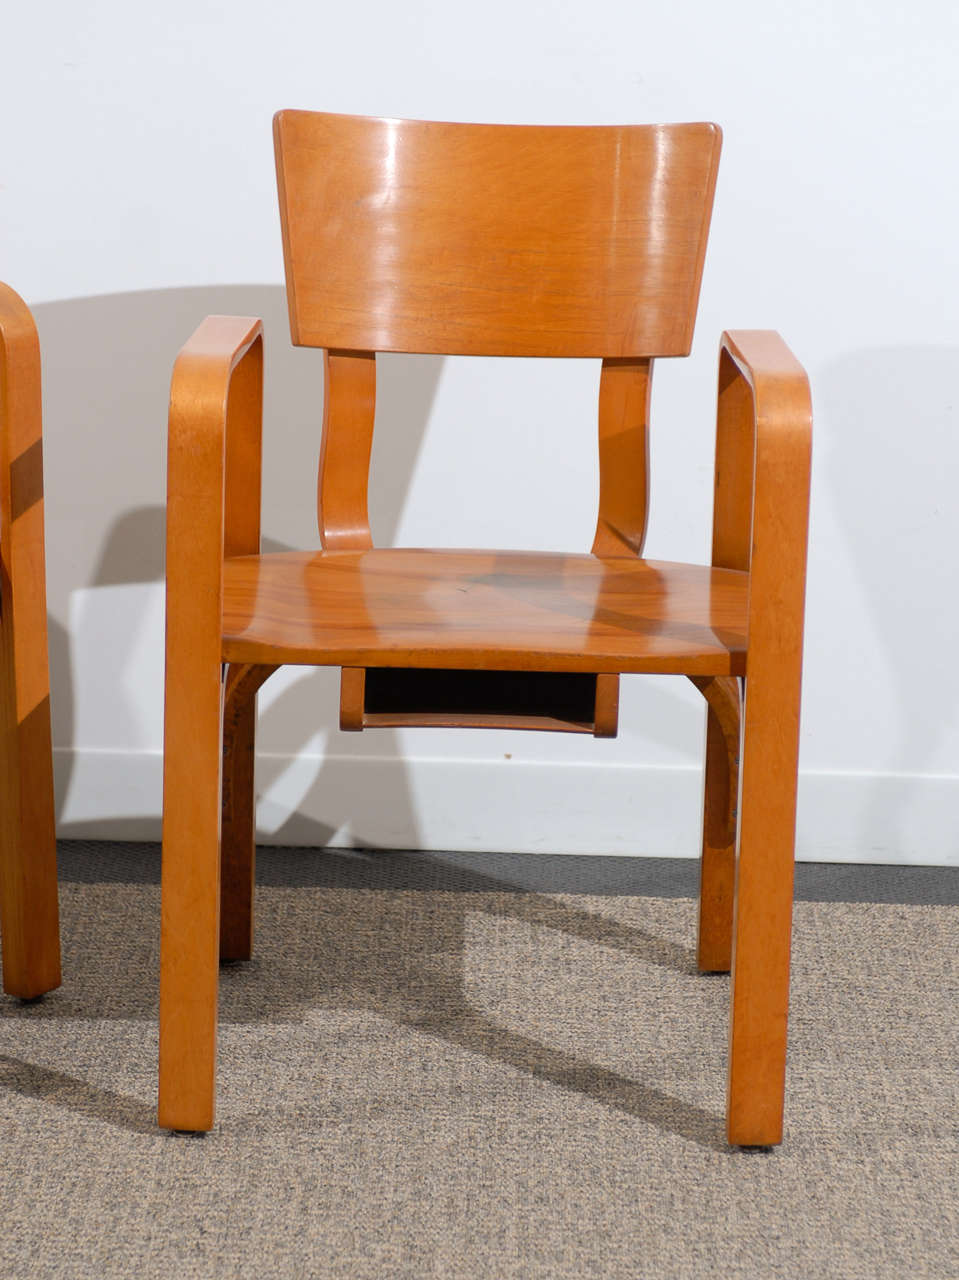 A handsome pair of bent plywood arm chairs by Thonet, Circa 1940's. A very rich and warm color, with great patina. Rescued from an abandoned church, they are complete with a hymnbook holder under the seat ! Very Good Vintage Condition. The chairs